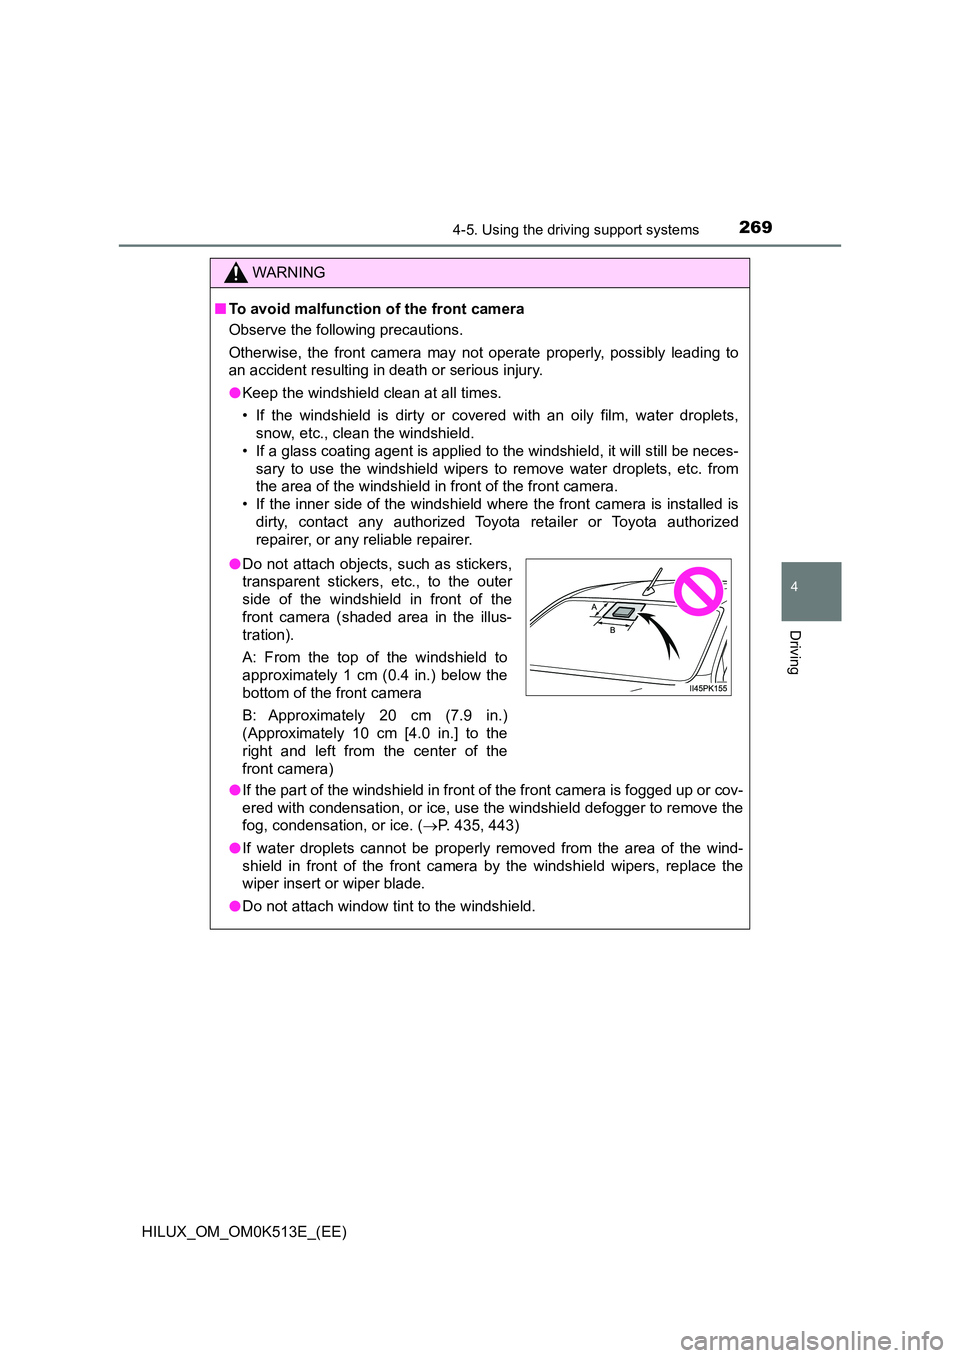 TOYOTA HILUX 2021  Owners Manual (in English) 2694-5. Using the driving support systems
4
Driving
HILUX_OM_OM0K513E_(EE)
WARNING
�QTo avoid malfunction of the front camera 
Observe the following precautions. 
Otherwise, the front camera may not o